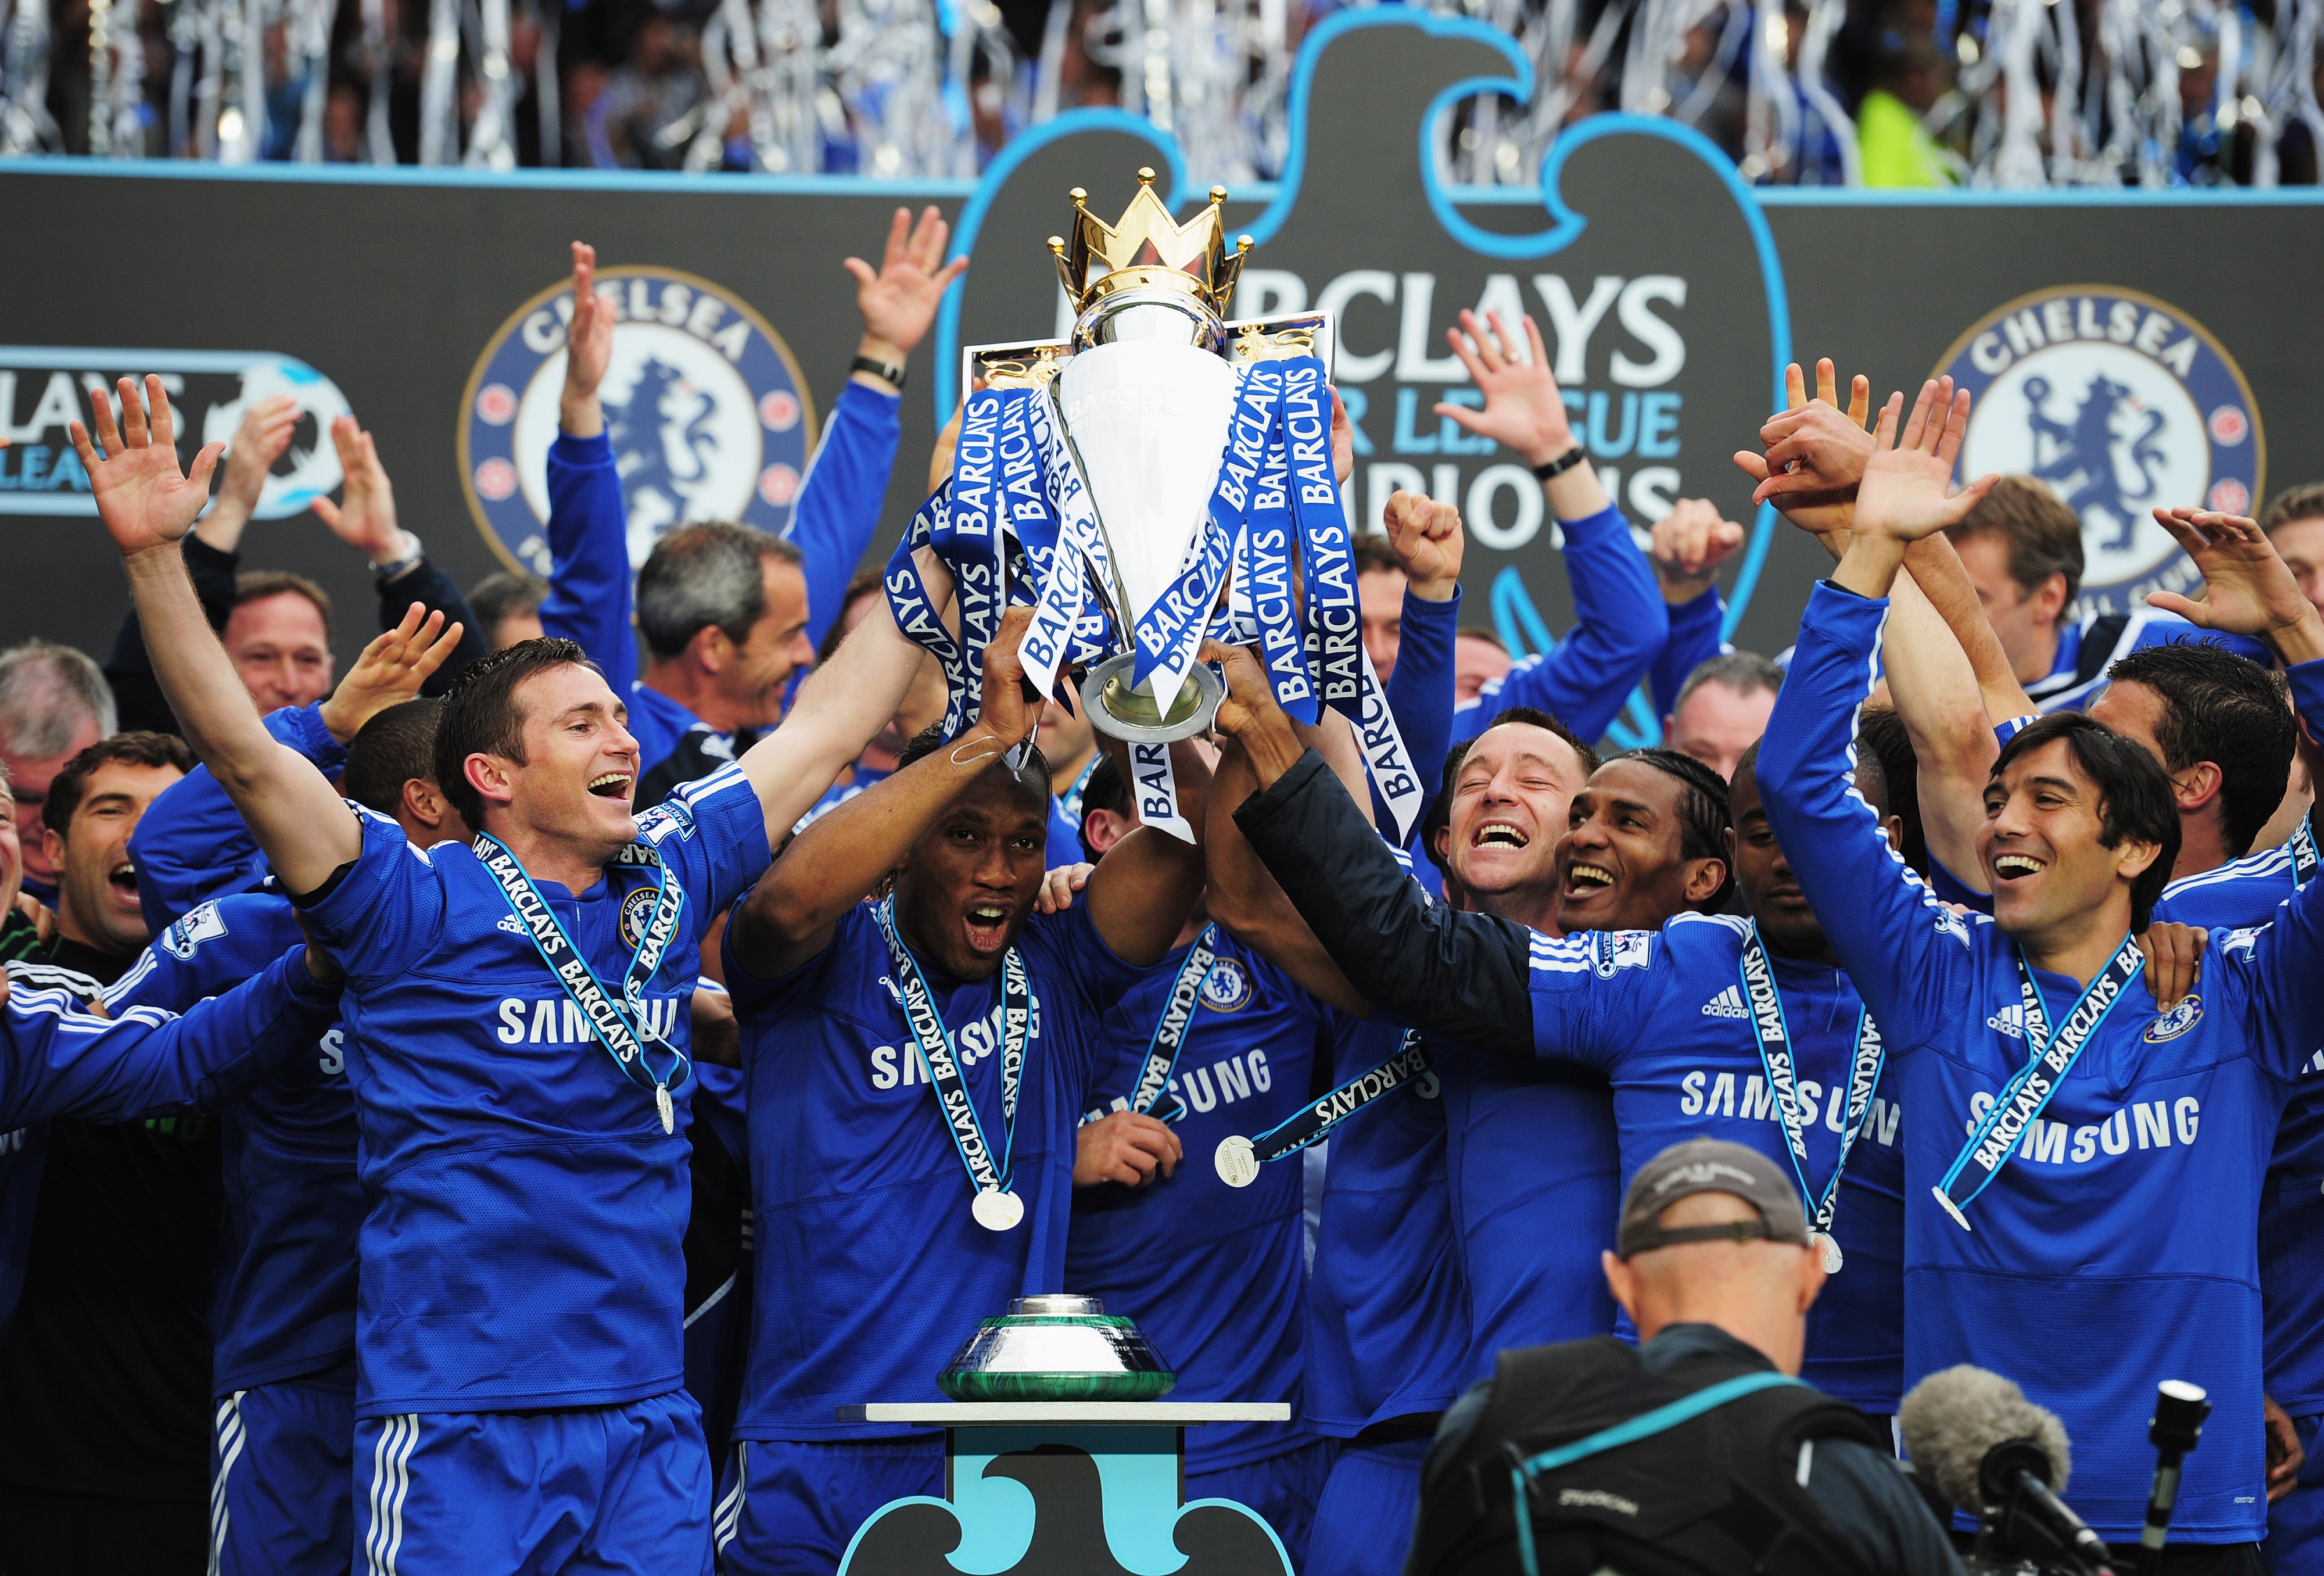 LONDON, ENGLAND - MAY 09:  John Terry and Frank Lamaprd of Chelse lift the trophy after the Barclays Premier League match between Chelsea and Wigan Athletic at Stamford Bridge on May 9, 2010 in London, England. Chelsea won 8-0 to win the title.  (Photo by